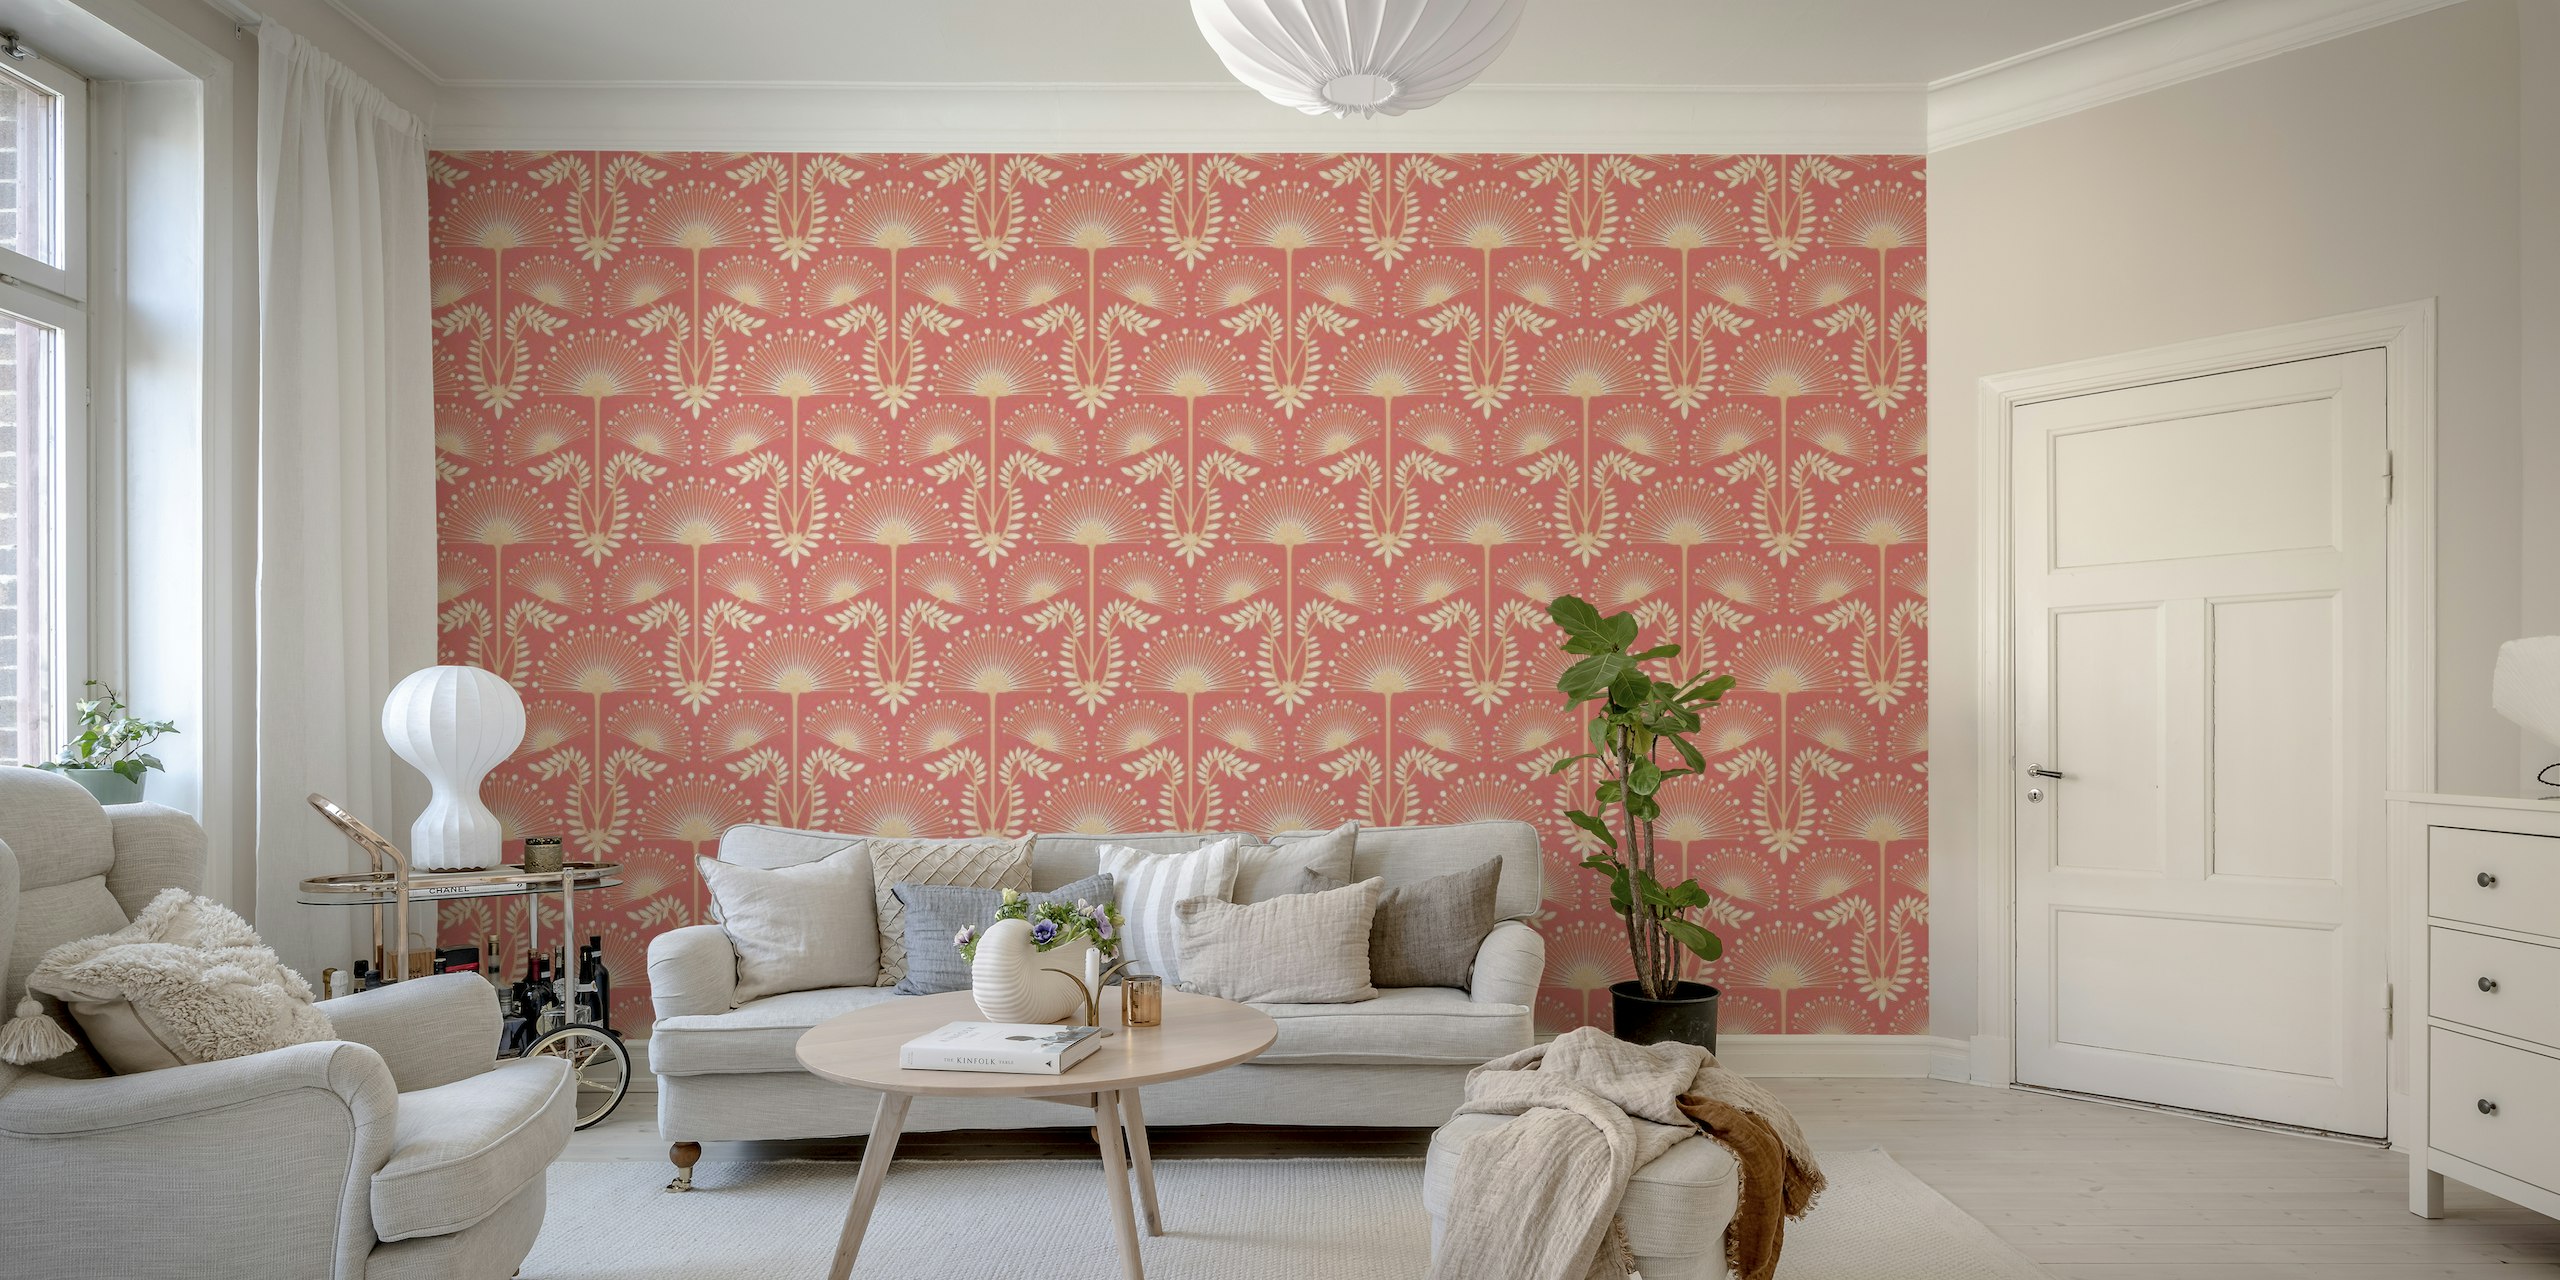 MIMOSA Art Deco Floral - Peach Coral - Large behang